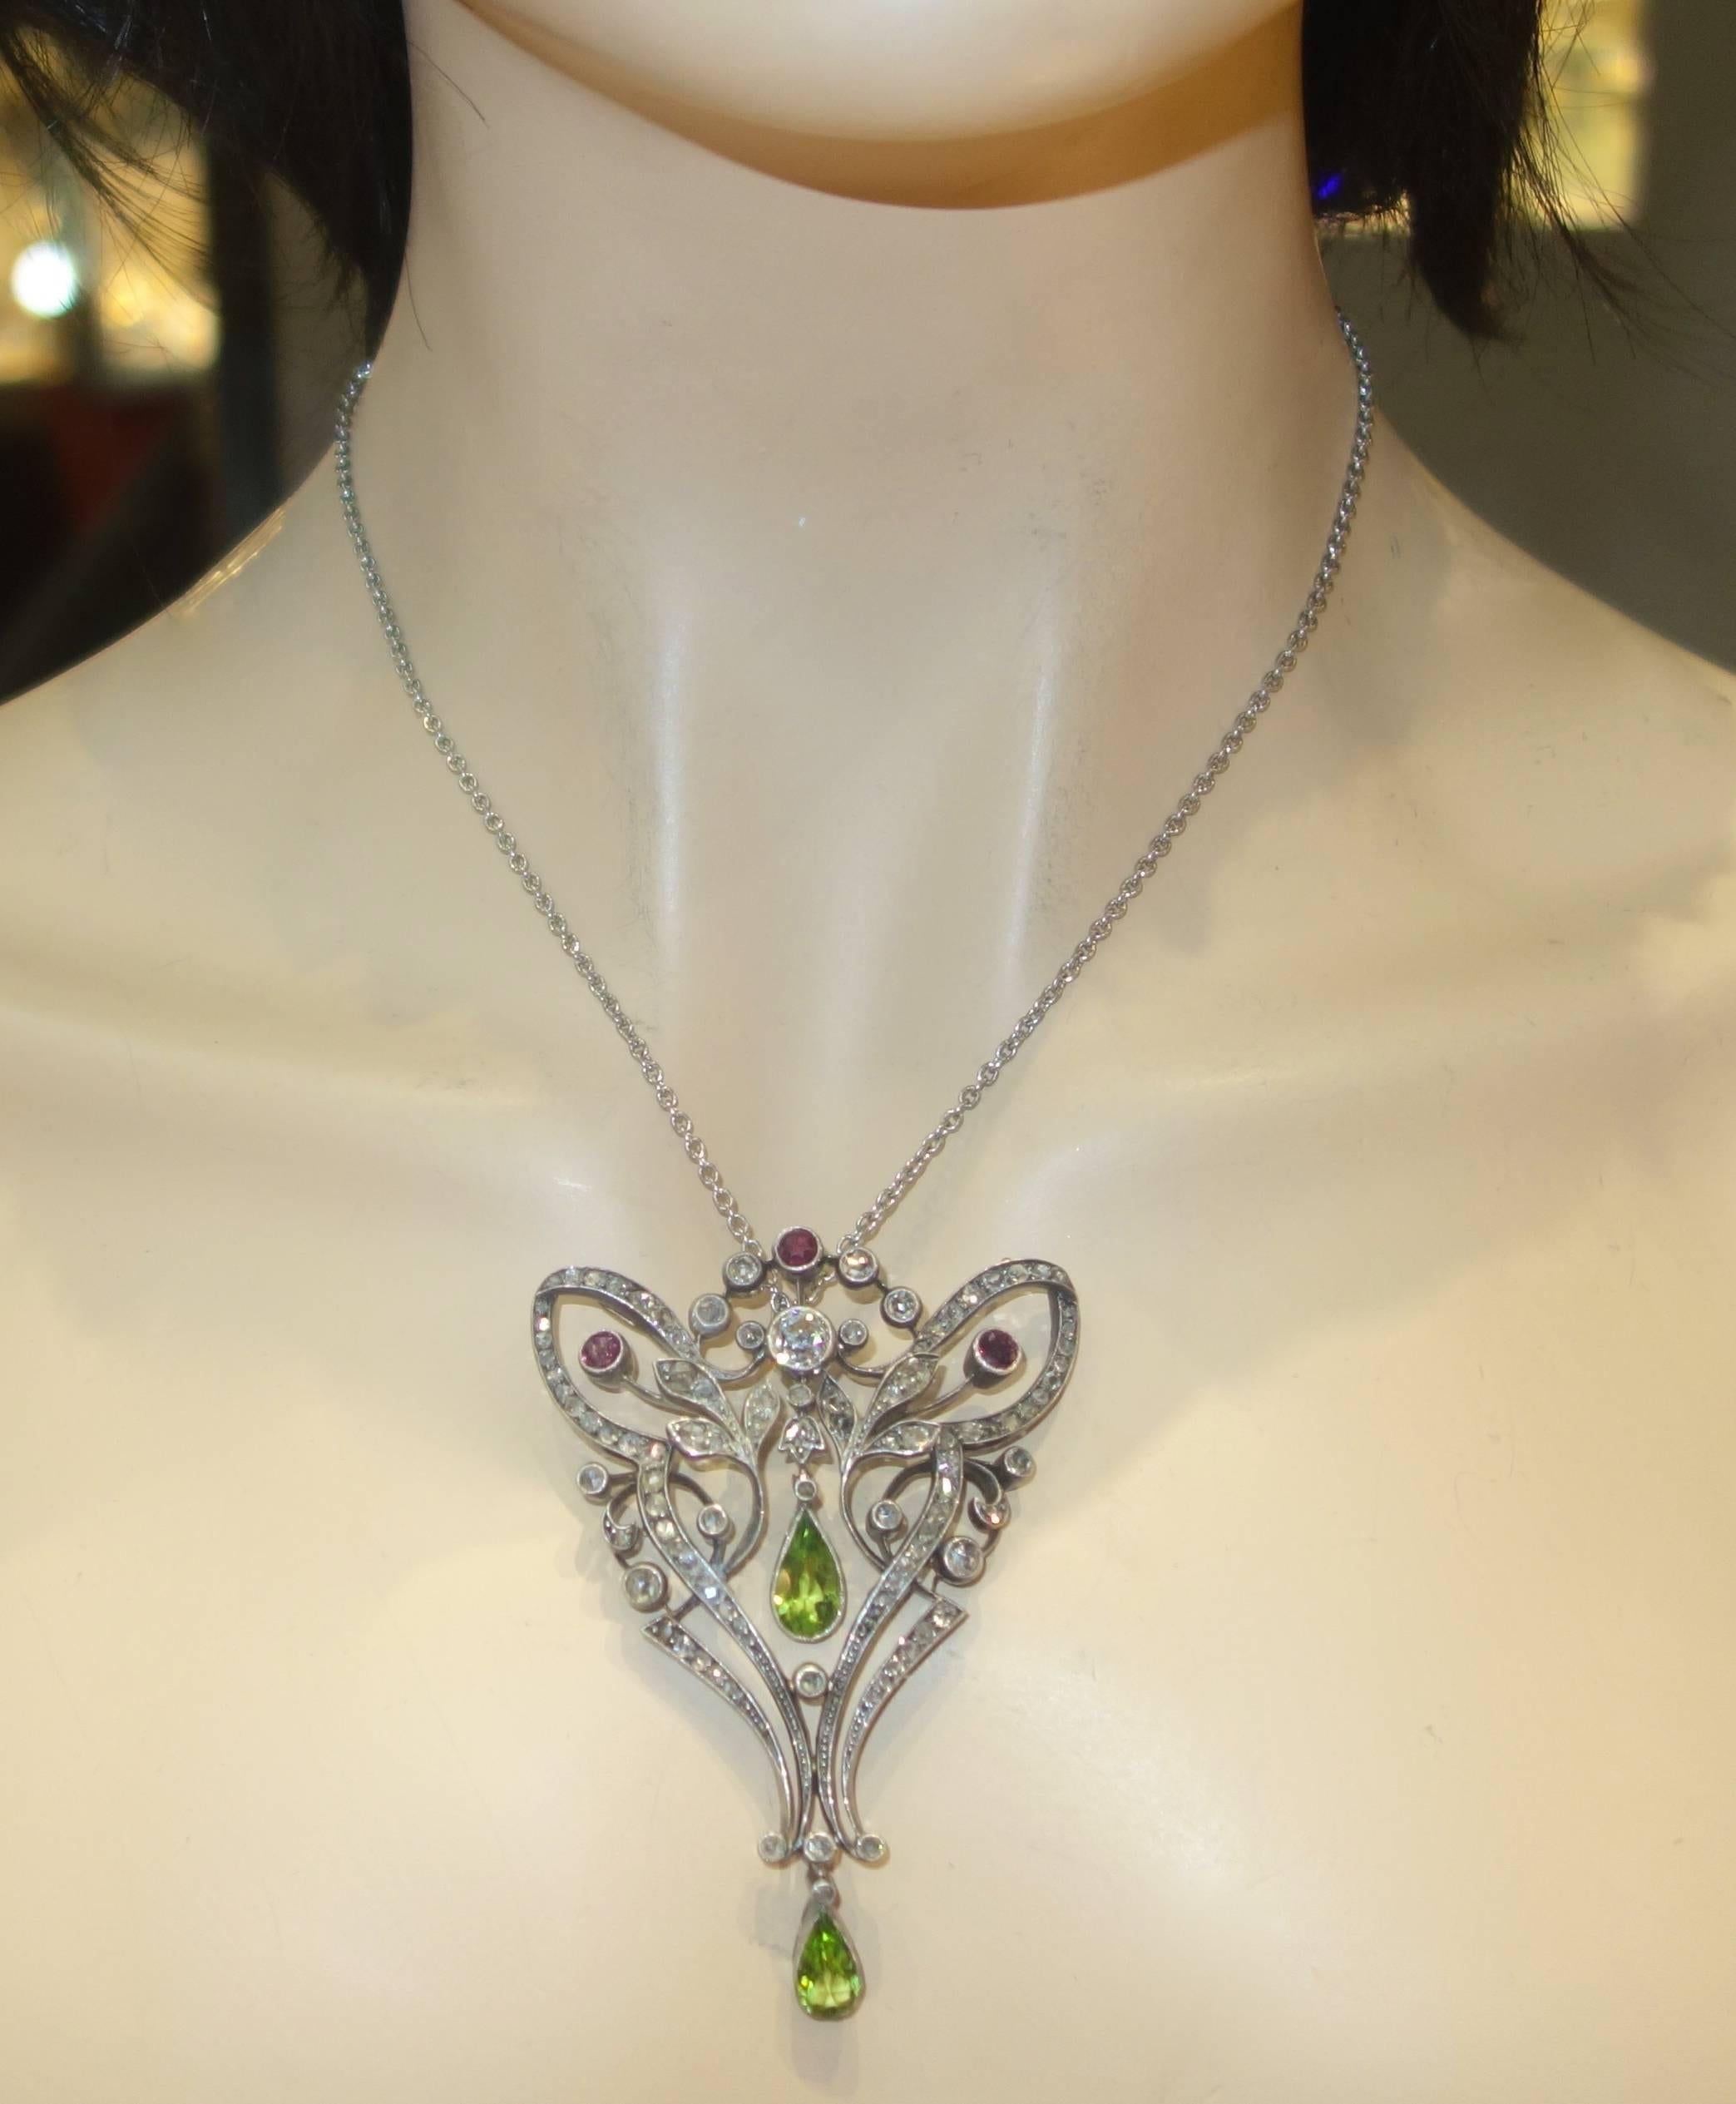 Rose cut and old mine cut diamonds are set with rubies (approximately 1 ct.) and centers two fine peridots in this silver topped gold long pendant which has an attachment so that it can be worn also as a brooch.  The fine green pear cut peridot